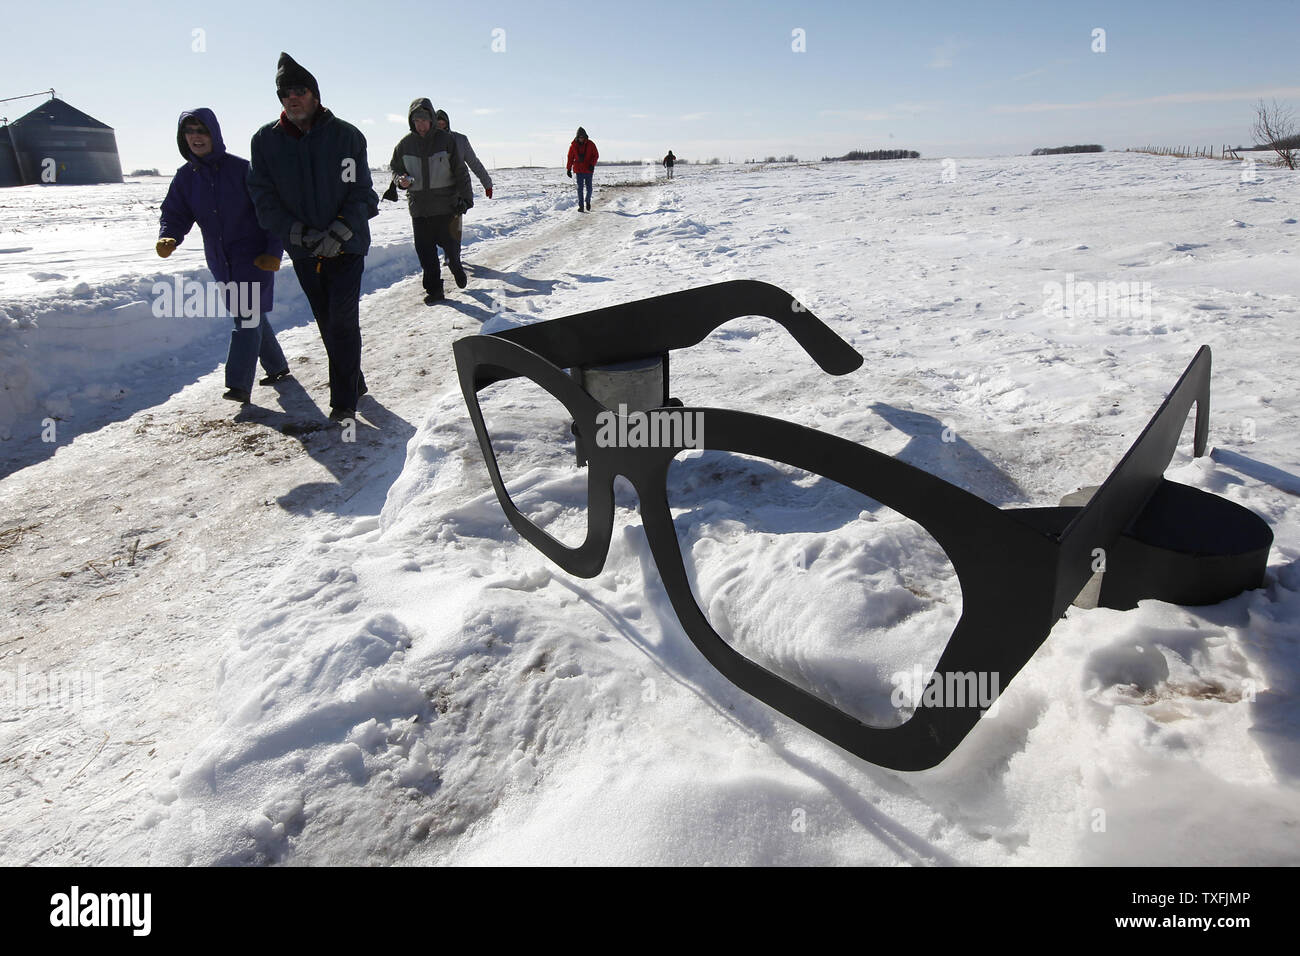 Rock 'n' roll fans walk by a giant pair of Buddy Holly glasses as they visit the site of the plane crash that killed Holly, Ritchie Valens and J. P. 'The Big Bopper' Richardson near Clear Lake, Iowa on February 2, 2009. Singer Don McLean coined the phrase 'the day the music died' in his hit song American Pie referring to the death of the three rock 'n' roll pioneers in the early morning hours of February 3, 1959. Thousands of people descended upon Clear Lake to celebrate the 50th anniversary of 'the day the music died'.   (UPI Photo/Brian Kersey) Stock Photo